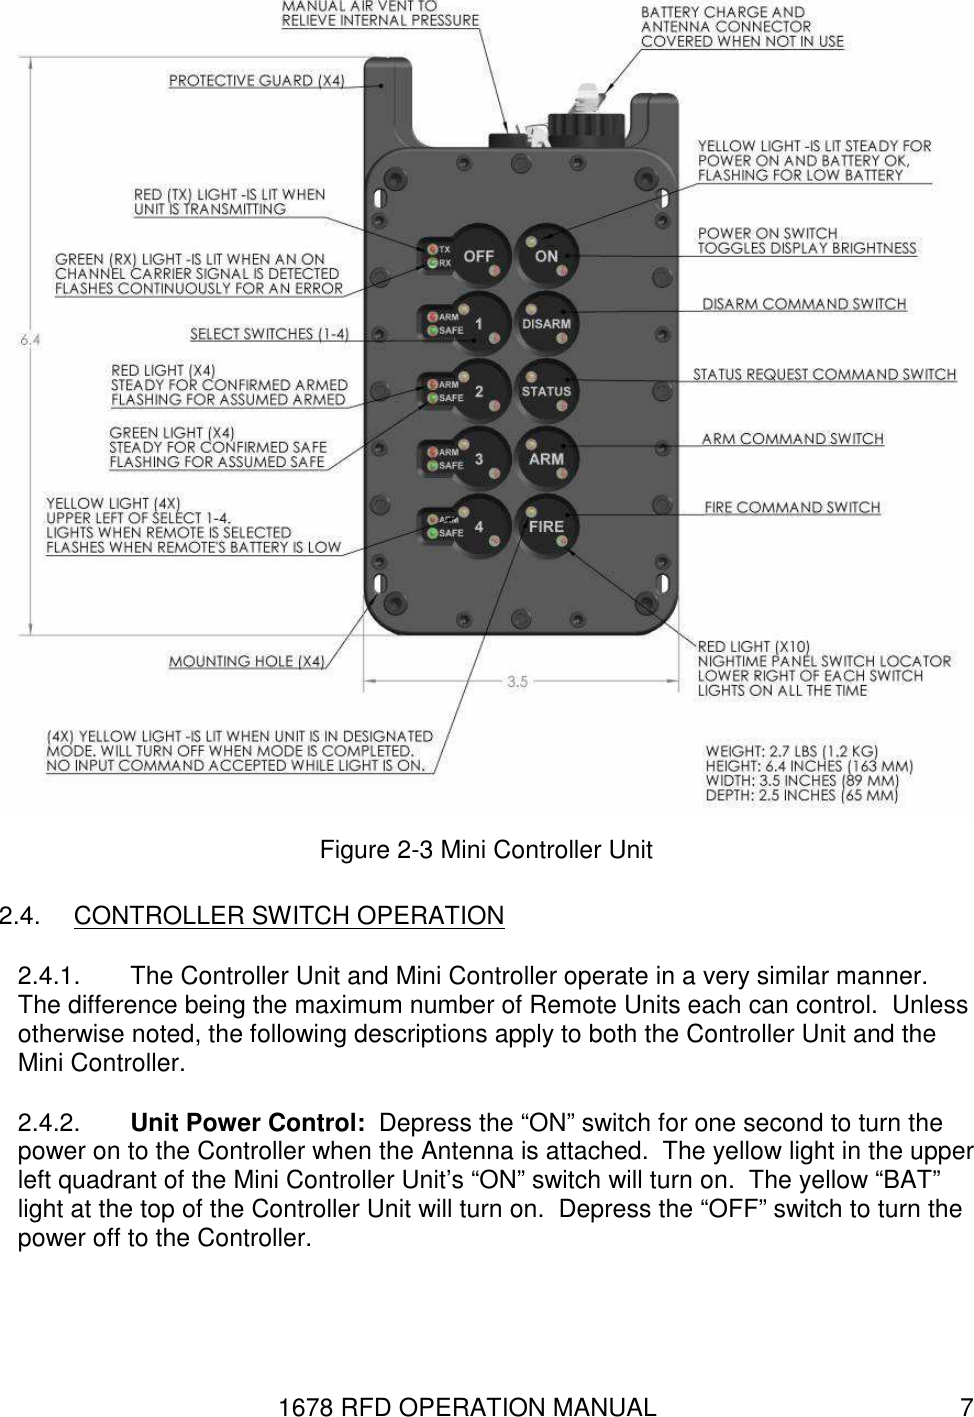 1678 RFD OPERATION MANUAL  7  Figure 2-3 Mini Controller Unit 2.4.  CONTROLLER SWITCH OPERATION 2.4.1.  The Controller Unit and Mini Controller operate in a very similar manner.  The difference being the maximum number of Remote Units each can control.  Unless otherwise noted, the following descriptions apply to both the Controller Unit and the Mini Controller. 2.4.2.  Unit Power Control:  Depress the “ON” switch for one second to turn the power on to the Controller when the Antenna is attached.  The yellow light in the upper left quadrant of the Mini Controller Unit’s “ON” switch will turn on.  The yellow “BAT” light at the top of the Controller Unit will turn on.  Depress the “OFF” switch to turn the power off to the Controller. 